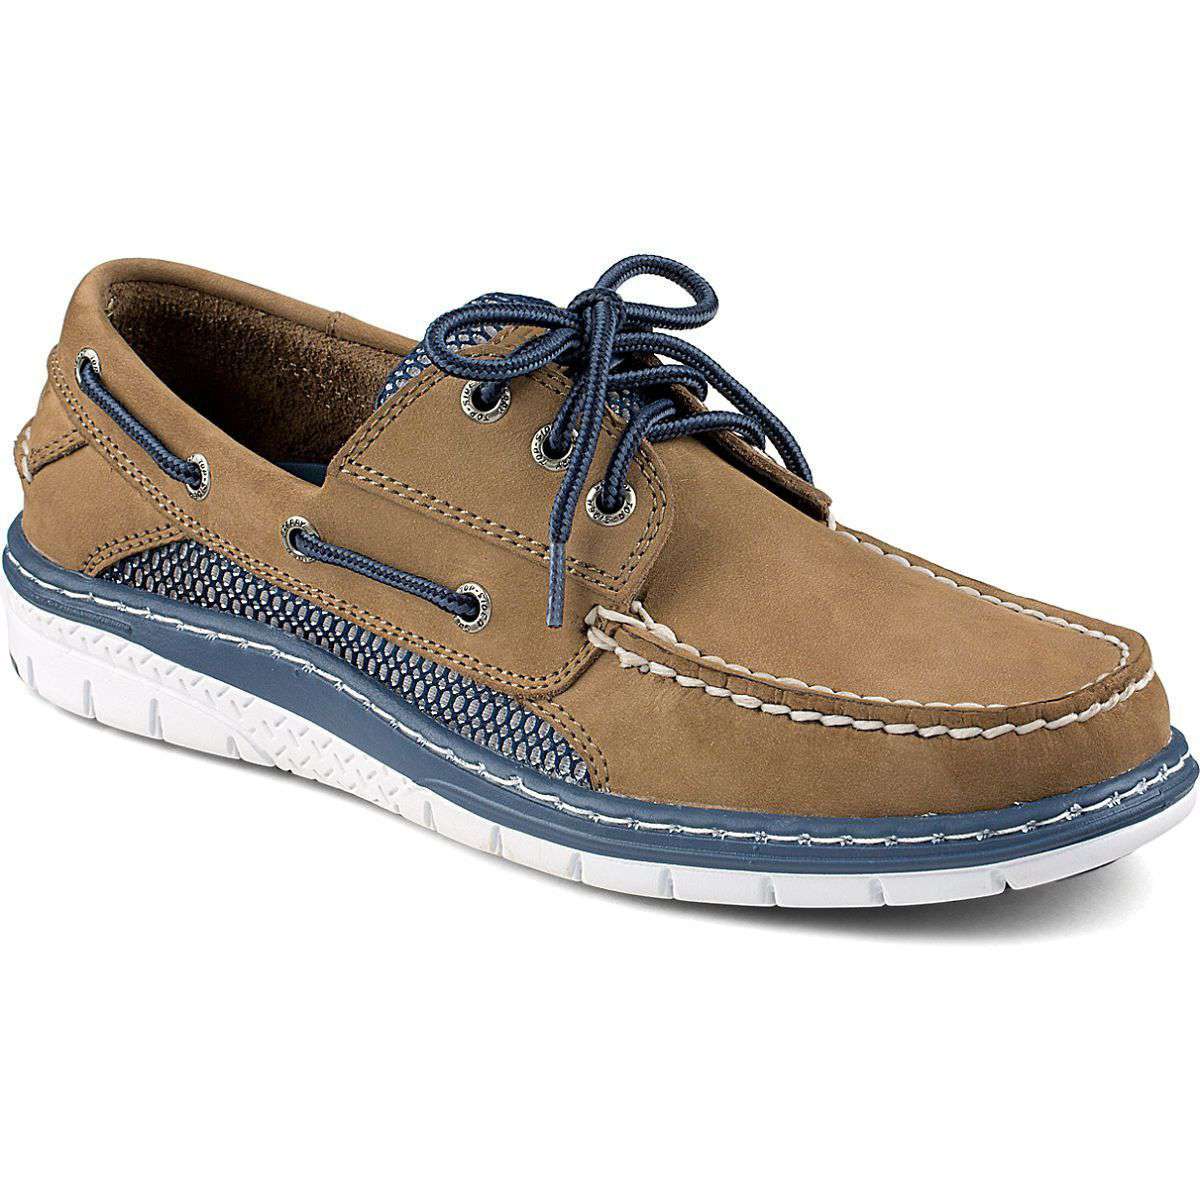 Men's Billfish Ultralite 3-Eye Boat Shoe in Taupe and Blue by Sperry - Country Club Prep